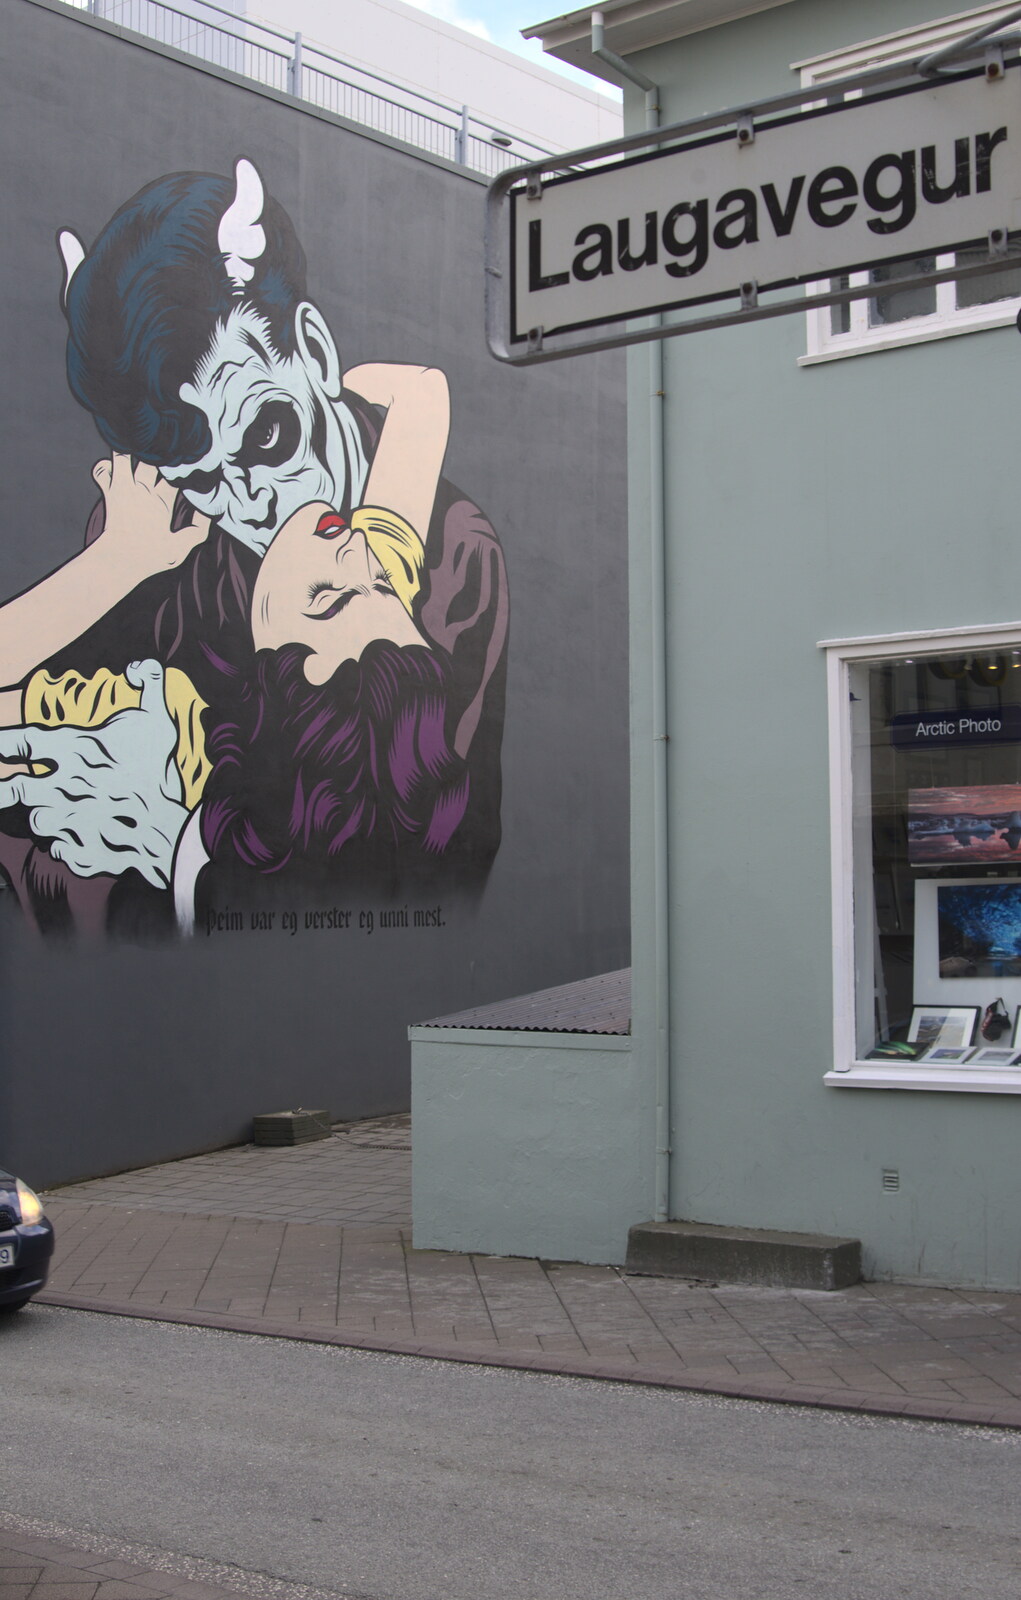 More street art on Laugavegur from Hallgrímskirkja Cathedral and Whale Watching, Reykjavik - 21st April 2017